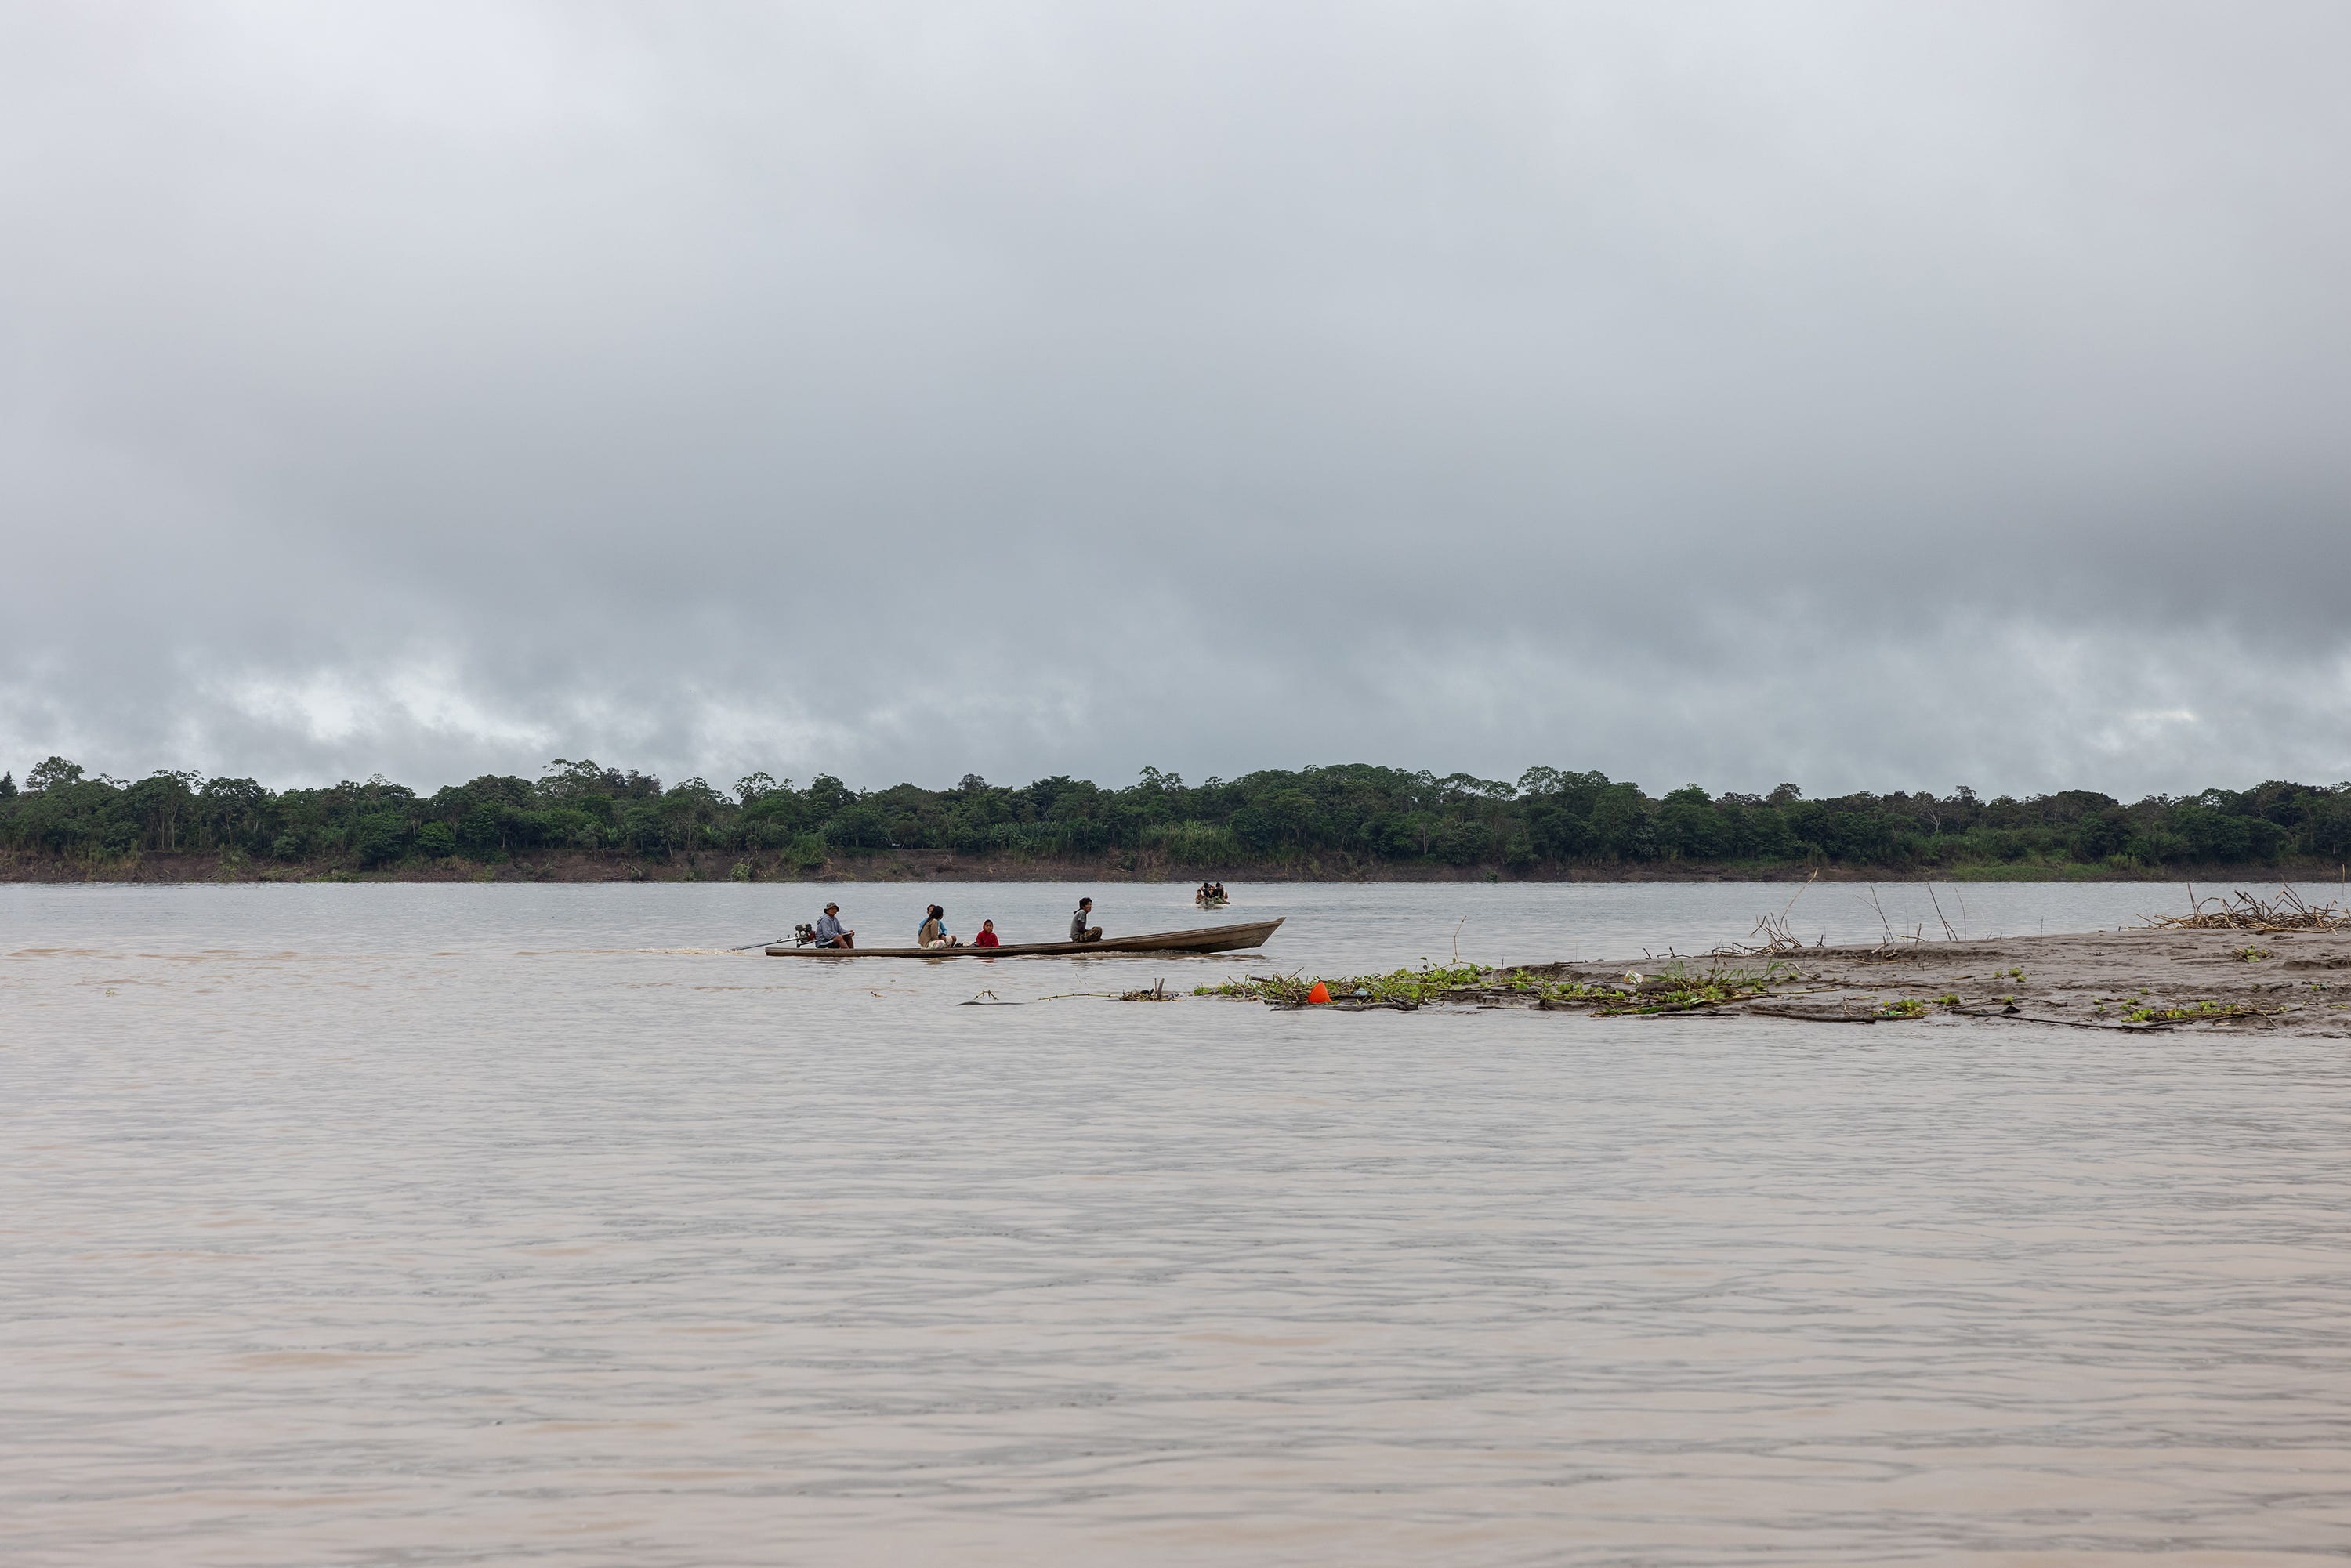 The Amazon River and its tributaries are the main access to a large number of Indigenous communities, such as San Pedro de los Lagos.